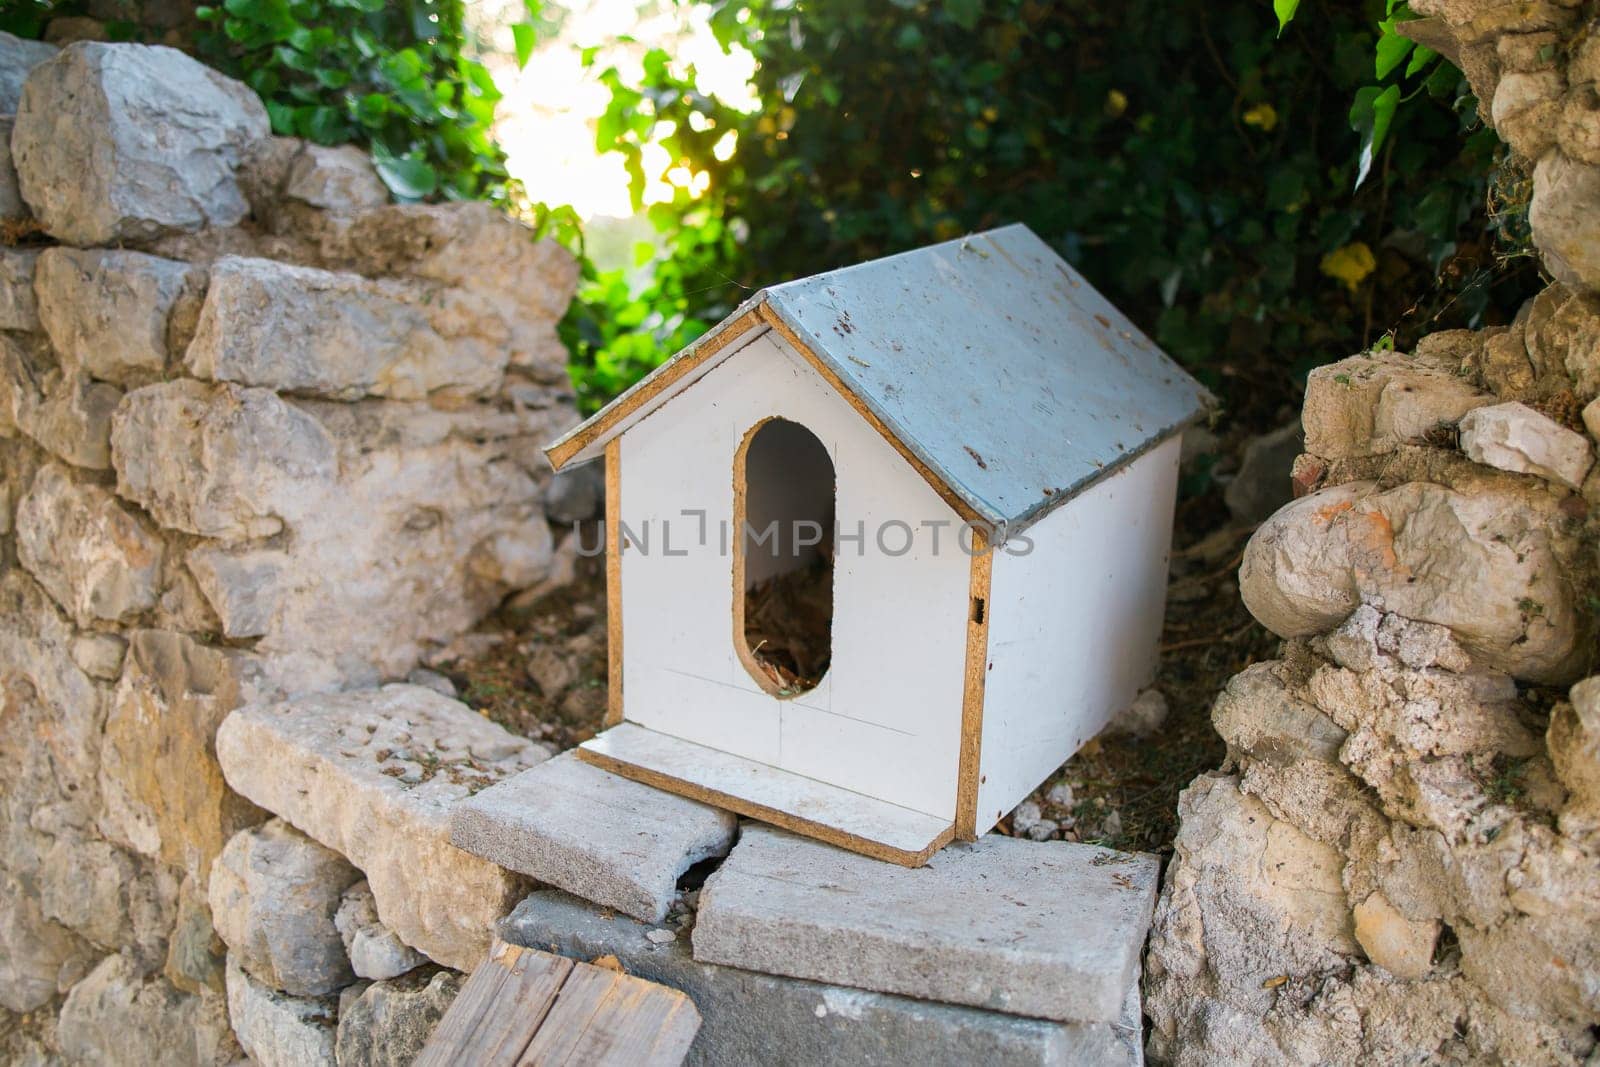 Hand made house for homeless cats stands in park among the trees by Satura86